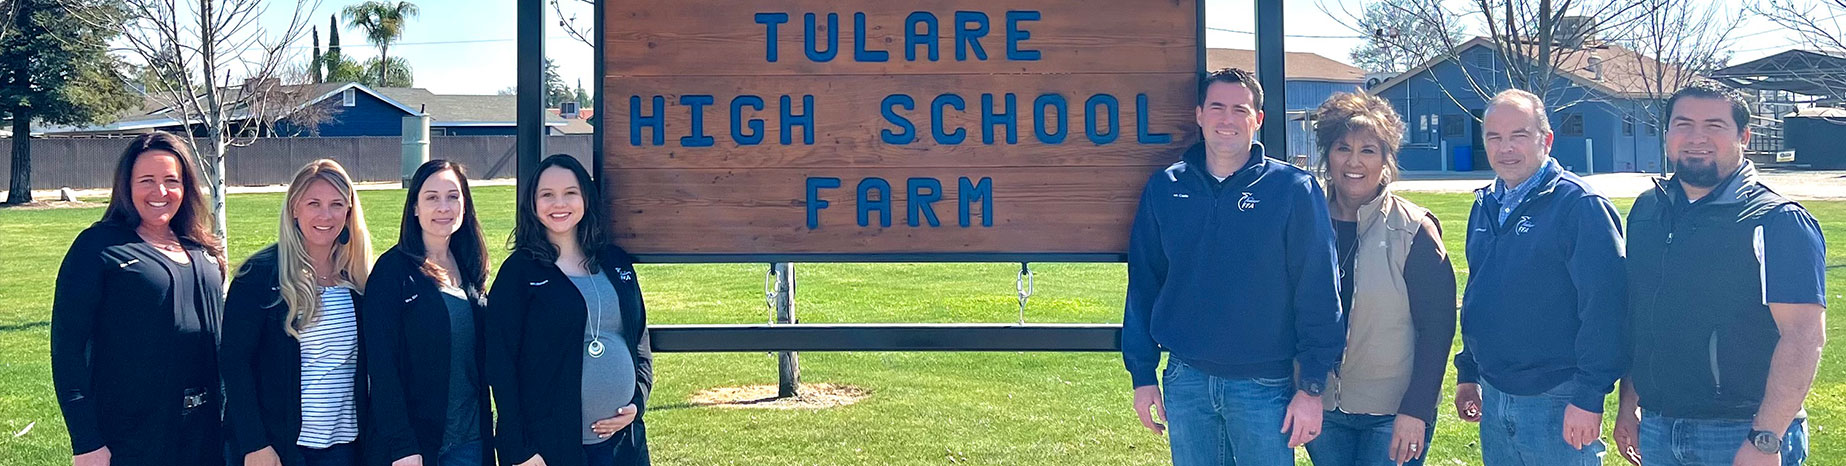 Staff members standing next to Tulare High School Farm sign